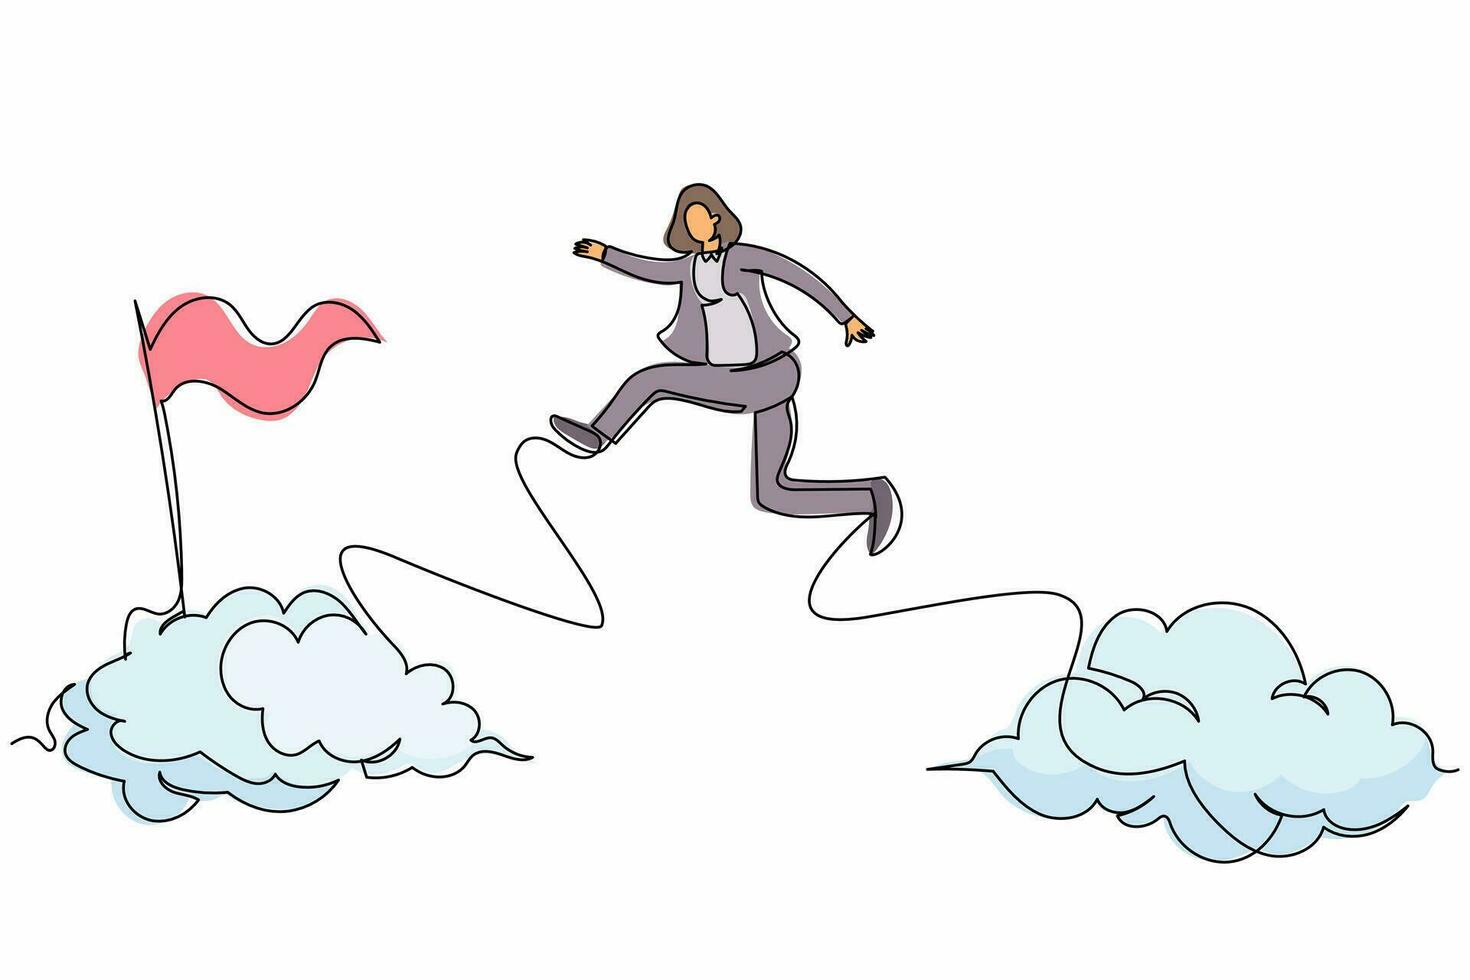 Continuous one line drawing brave businesswoman jump and leap over clouds to reach success target flag. Challenge of her career. Business metaphor. Single line draw design vector graphic illustration